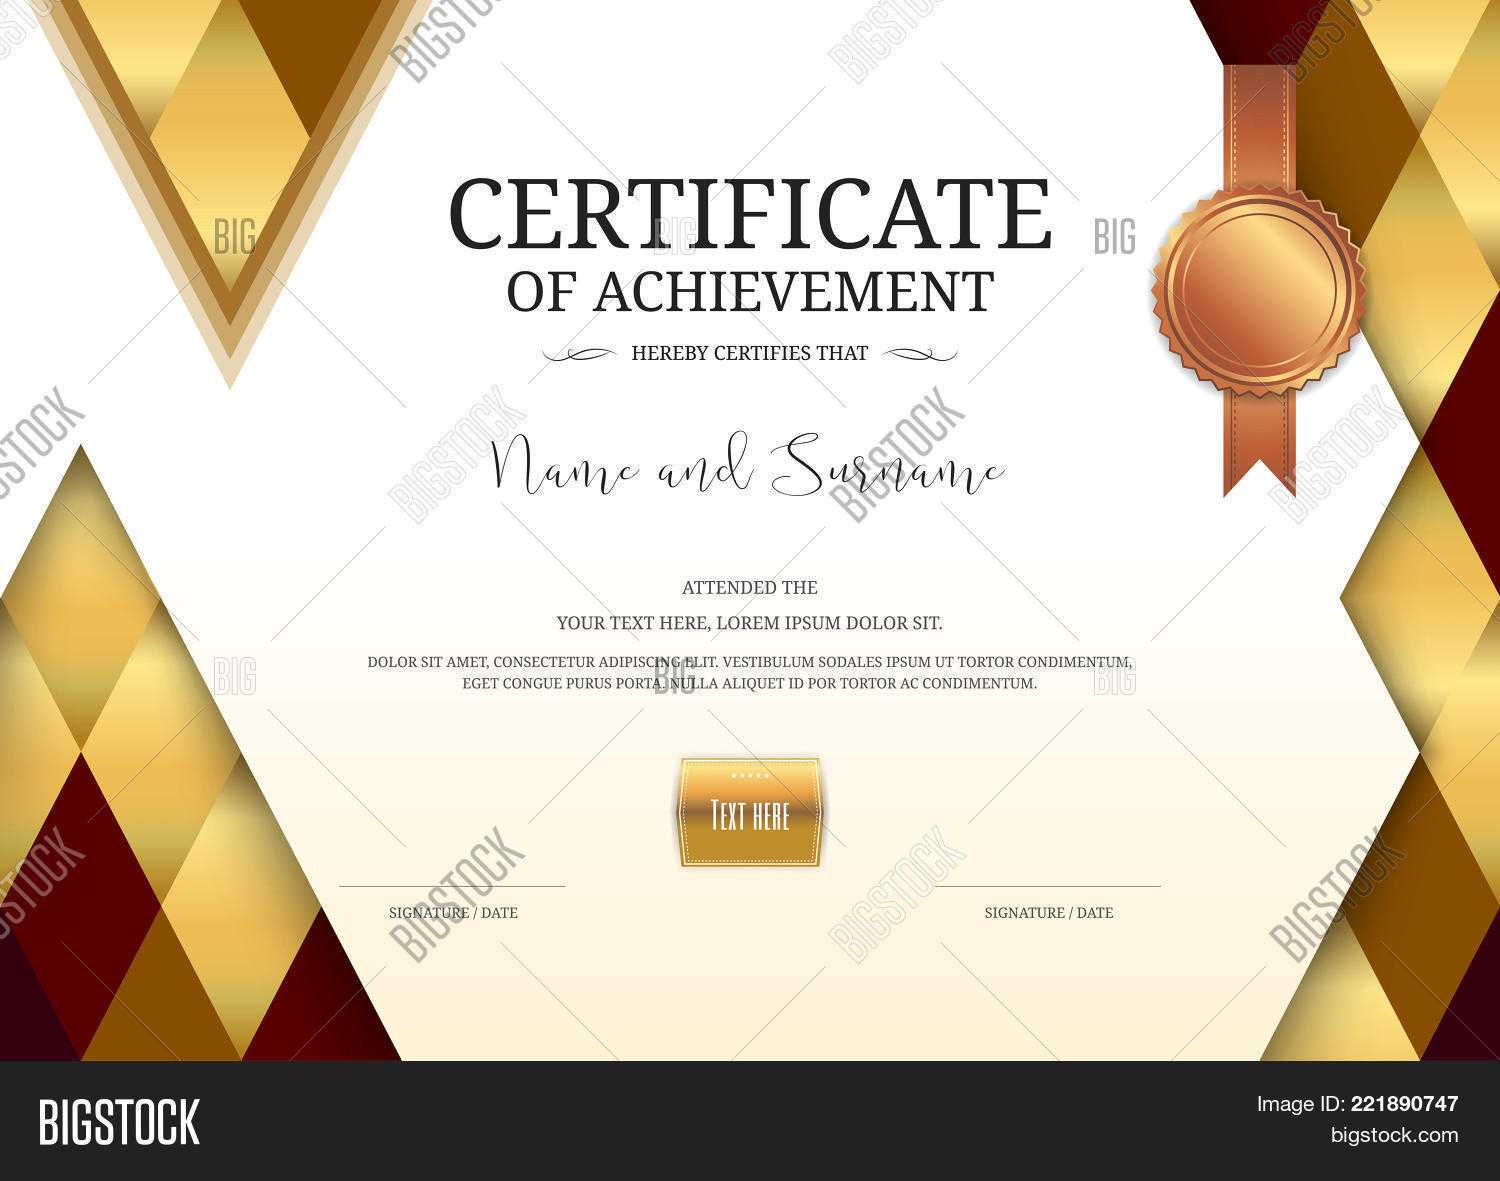 Luxury Certificate Vector & Photo (Free Trial) | Bigstock Within Elegant Certificate Templates Free